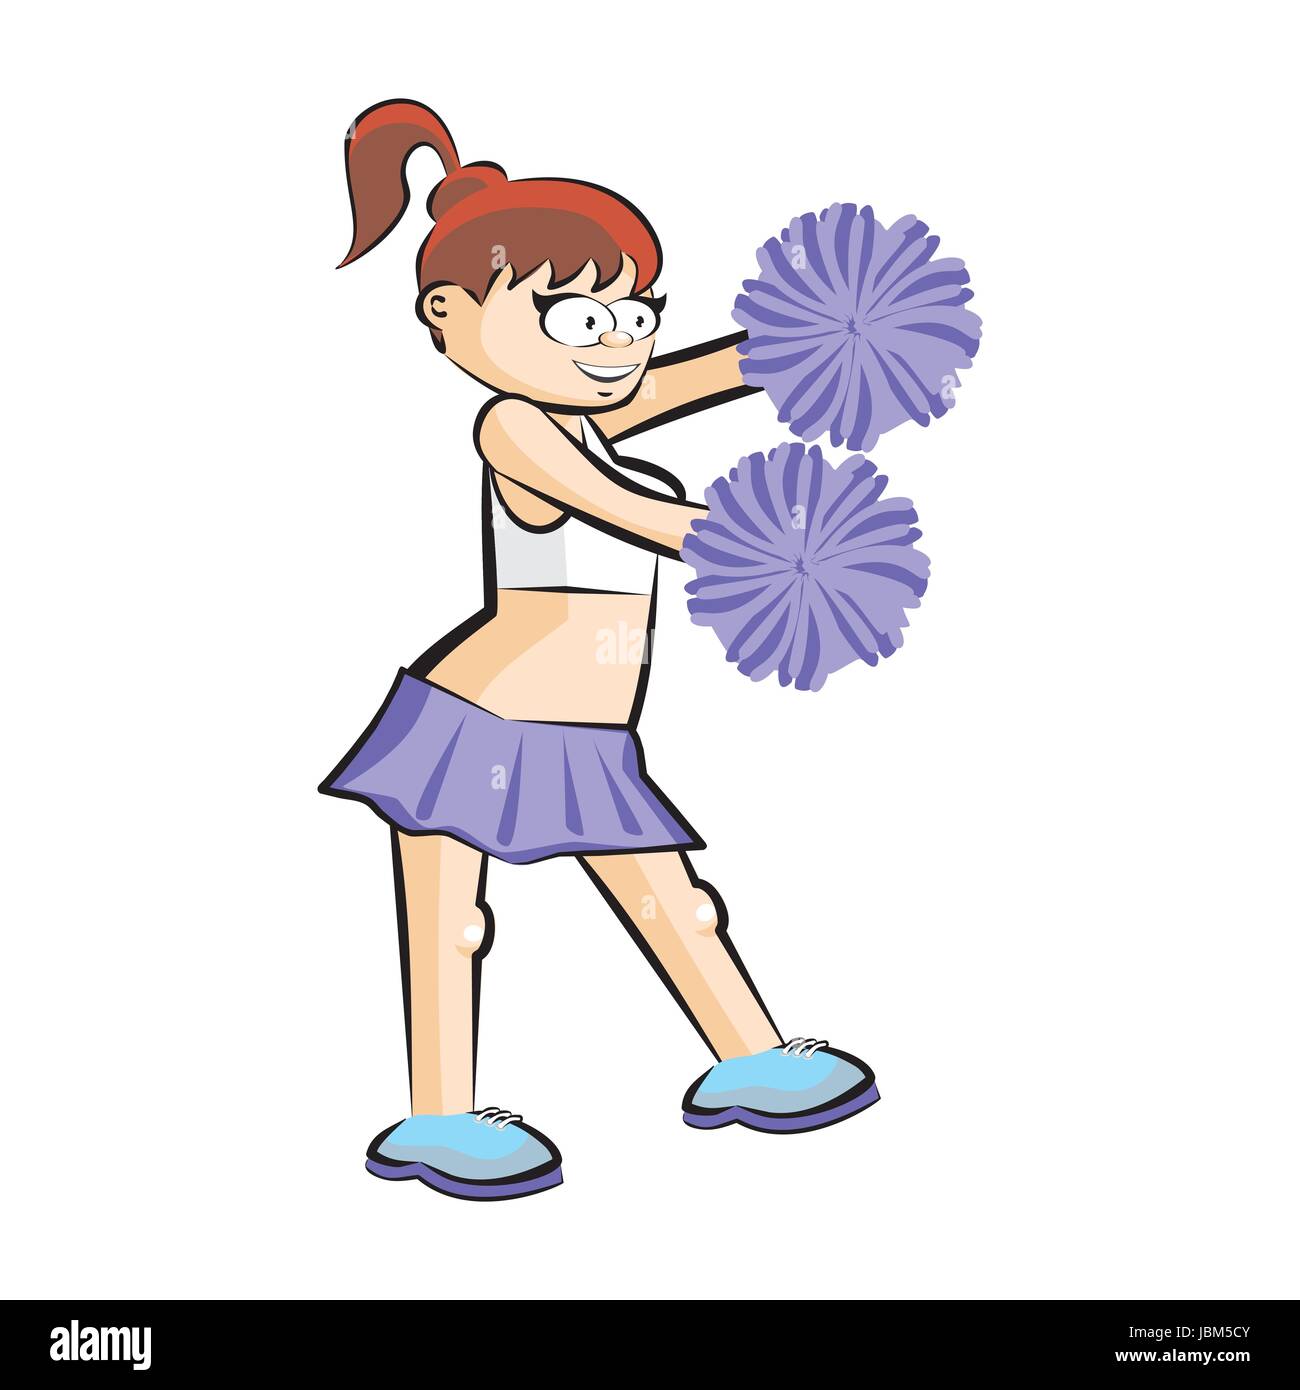 Cheerleader pom pom illustration Cut Out Stock Images & Pictures